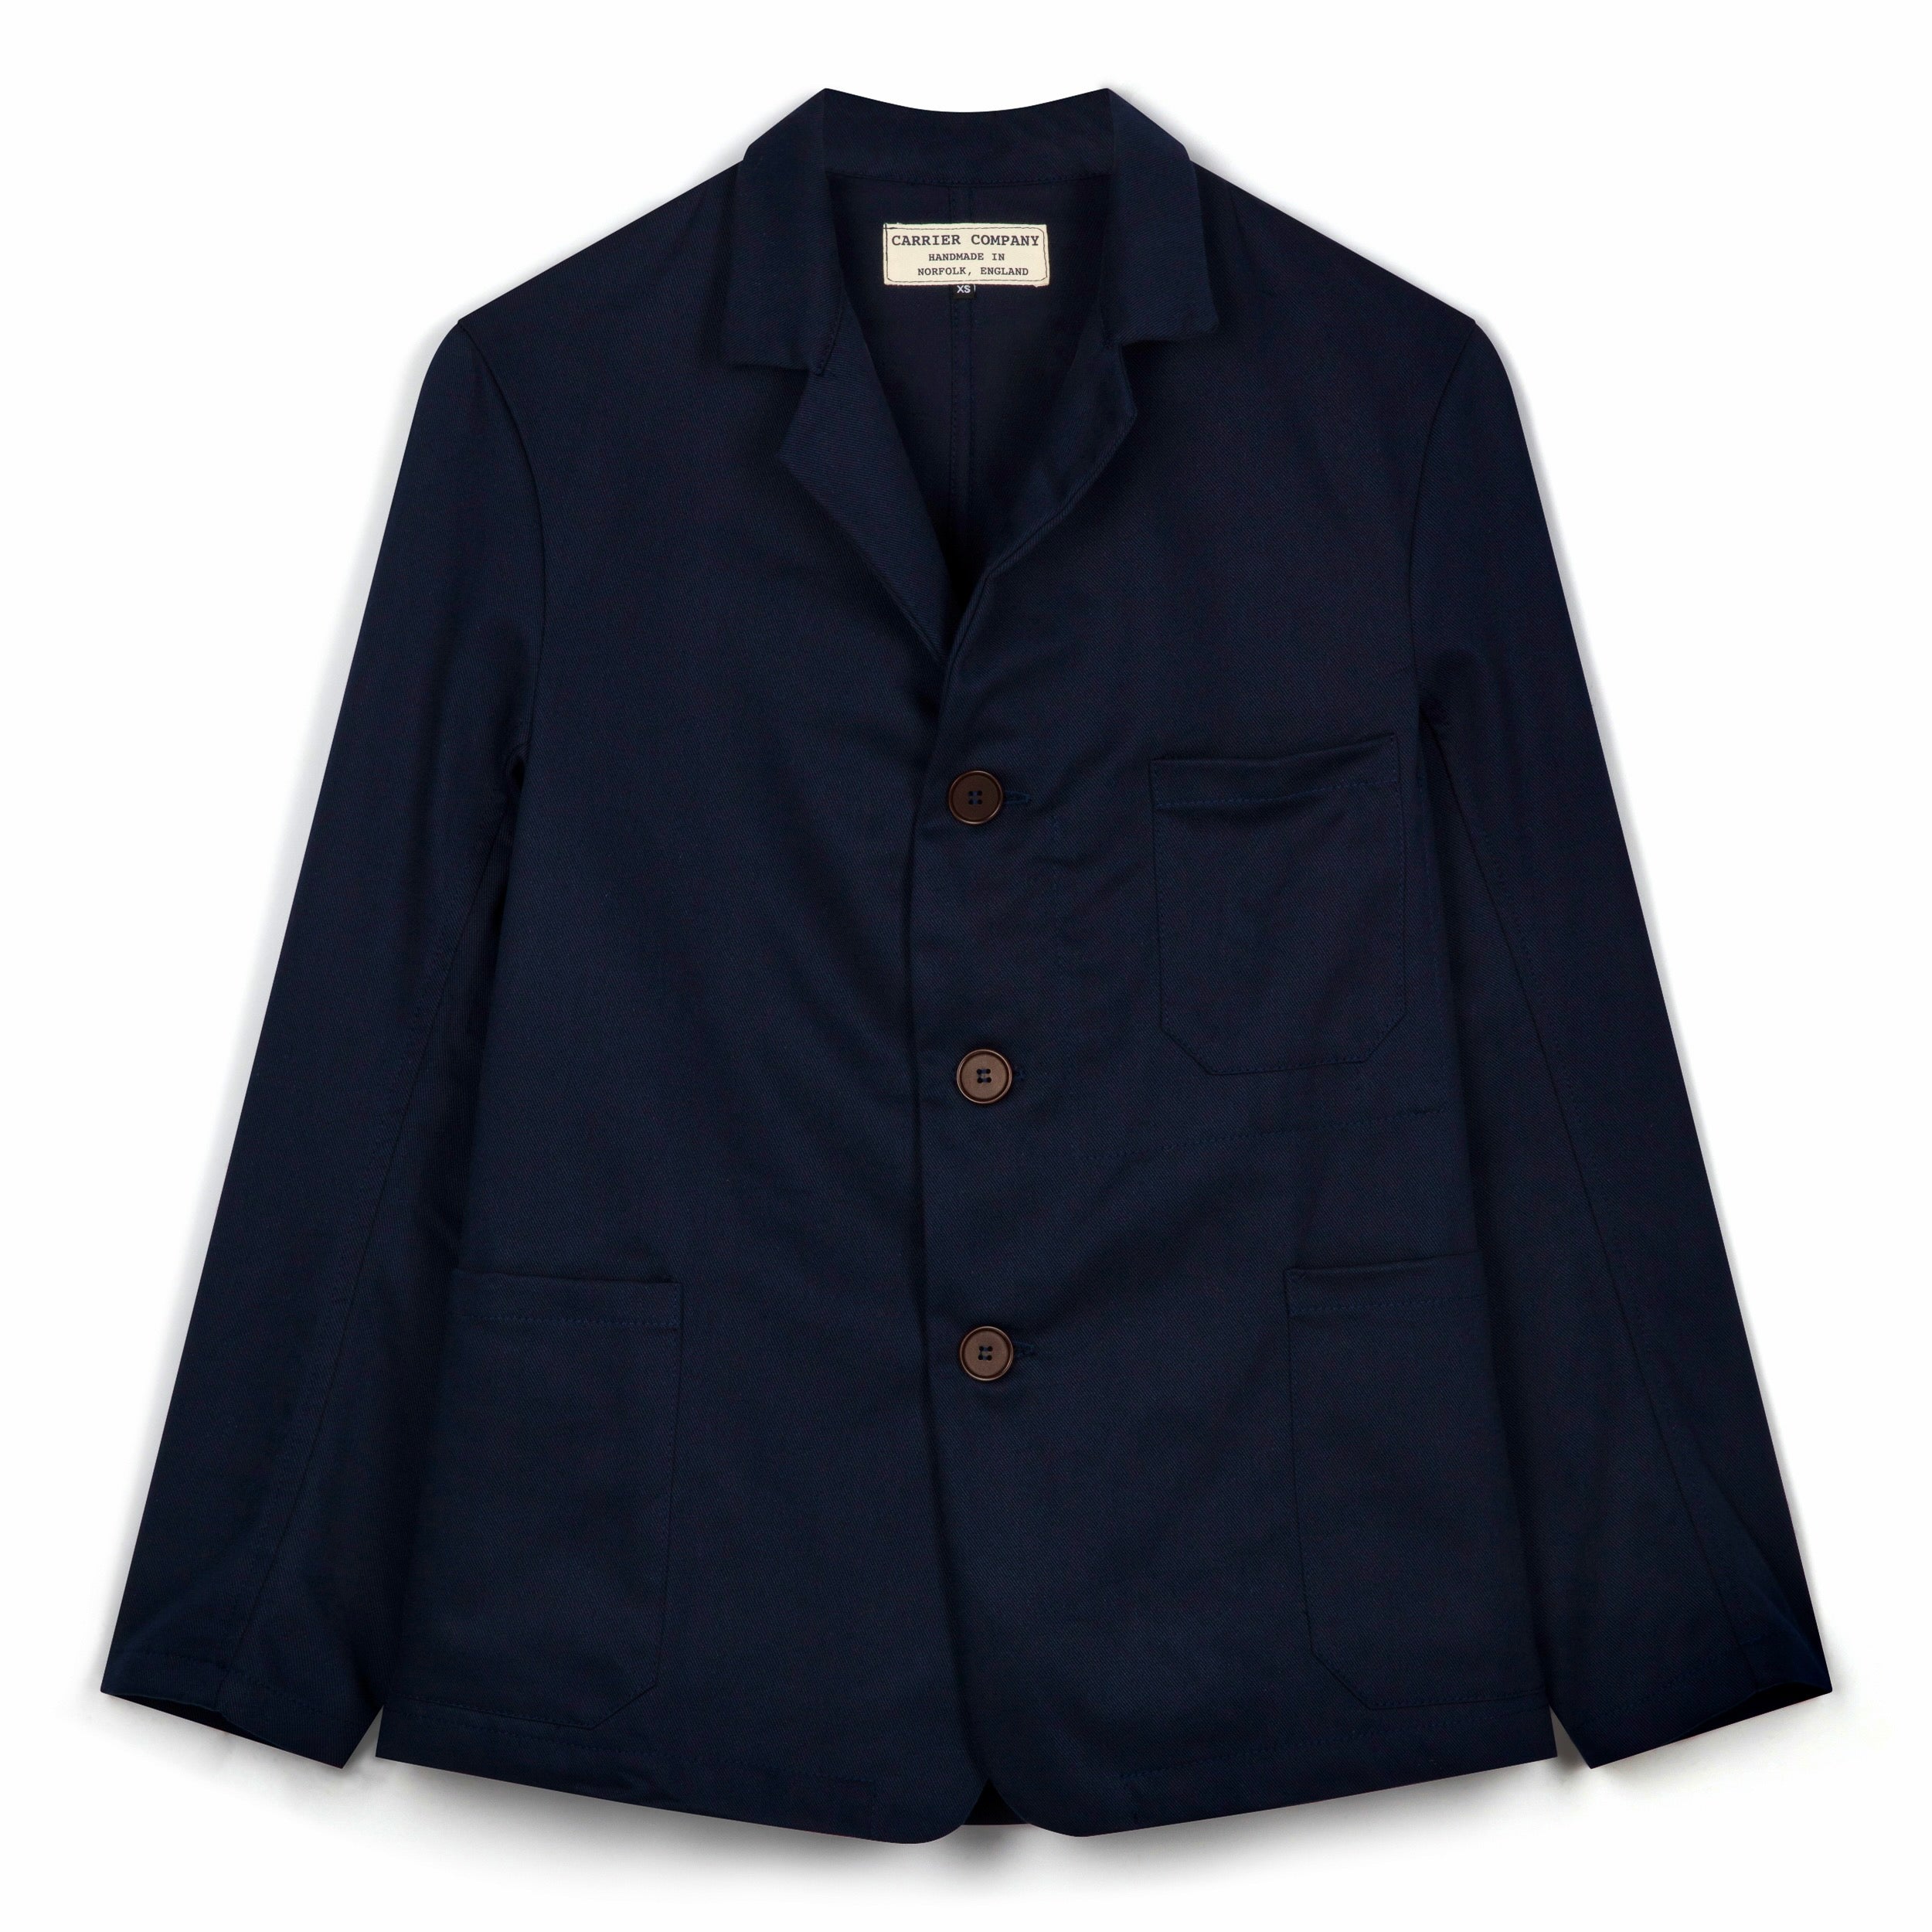 Carrier Company 3 Button Jacket in Navy Drill